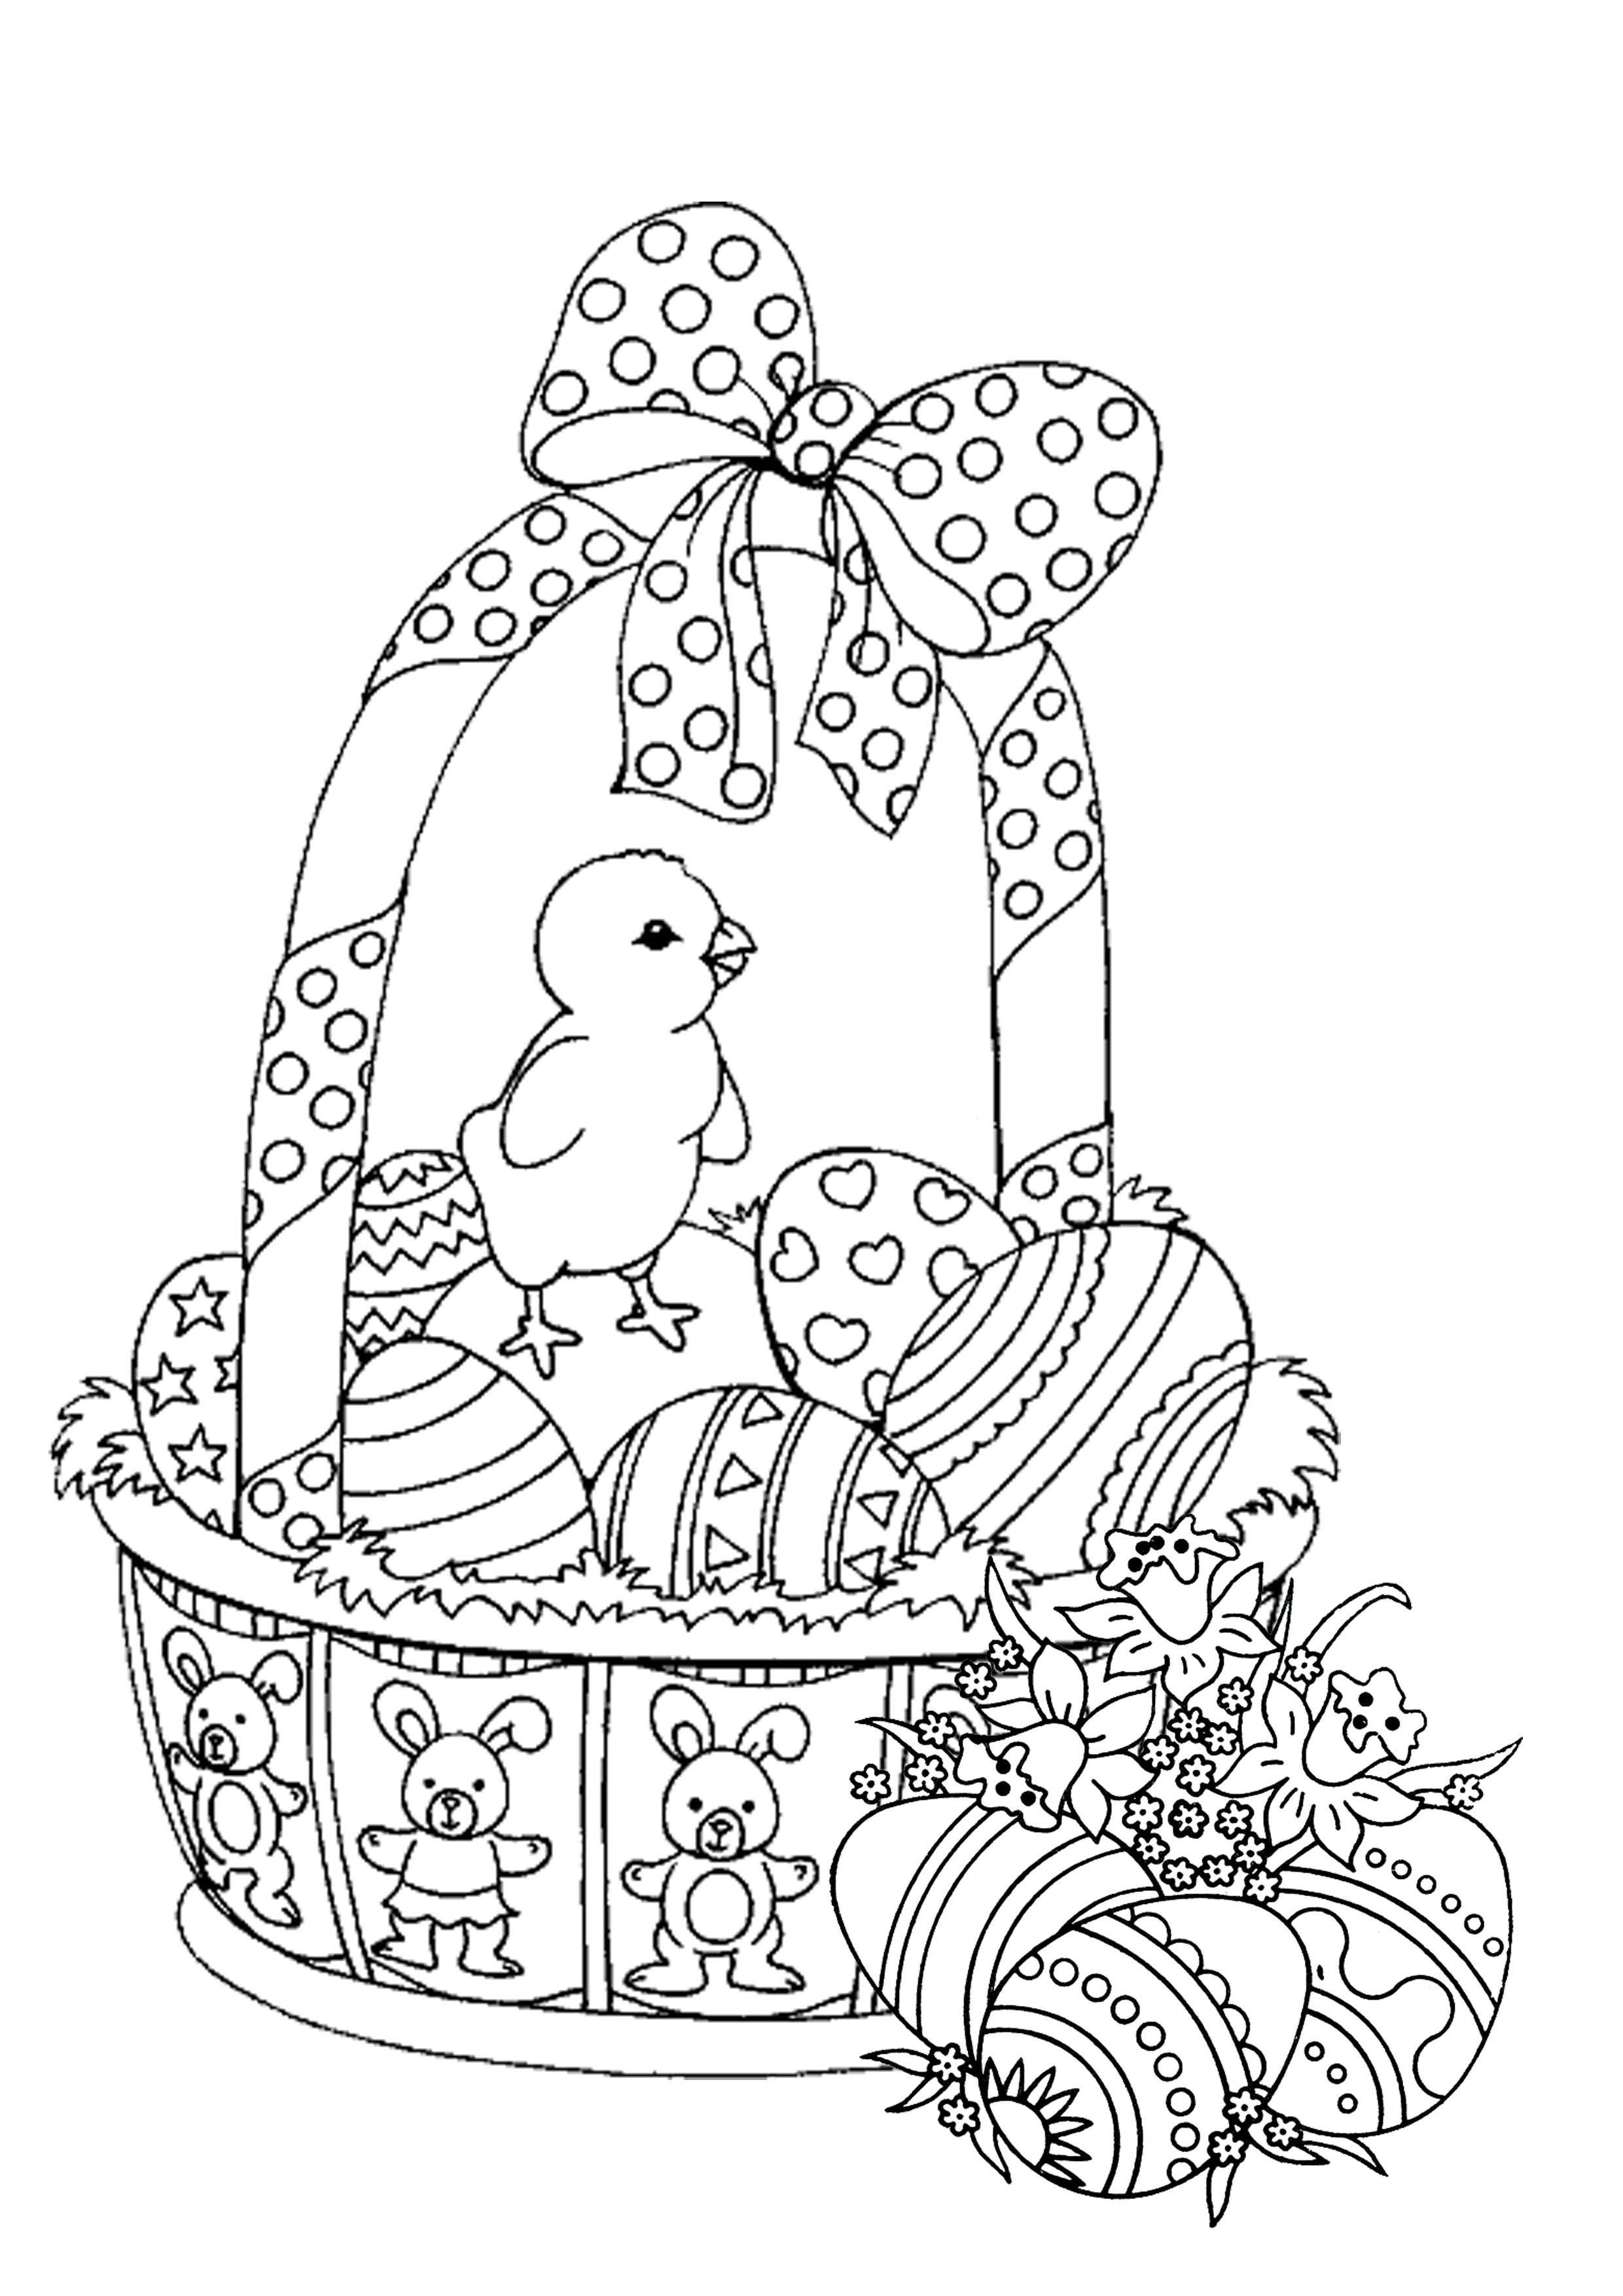 Coloring Pages For Adults Easter Easter Coloring Pages For Adults Best Coloring Pages For Kids